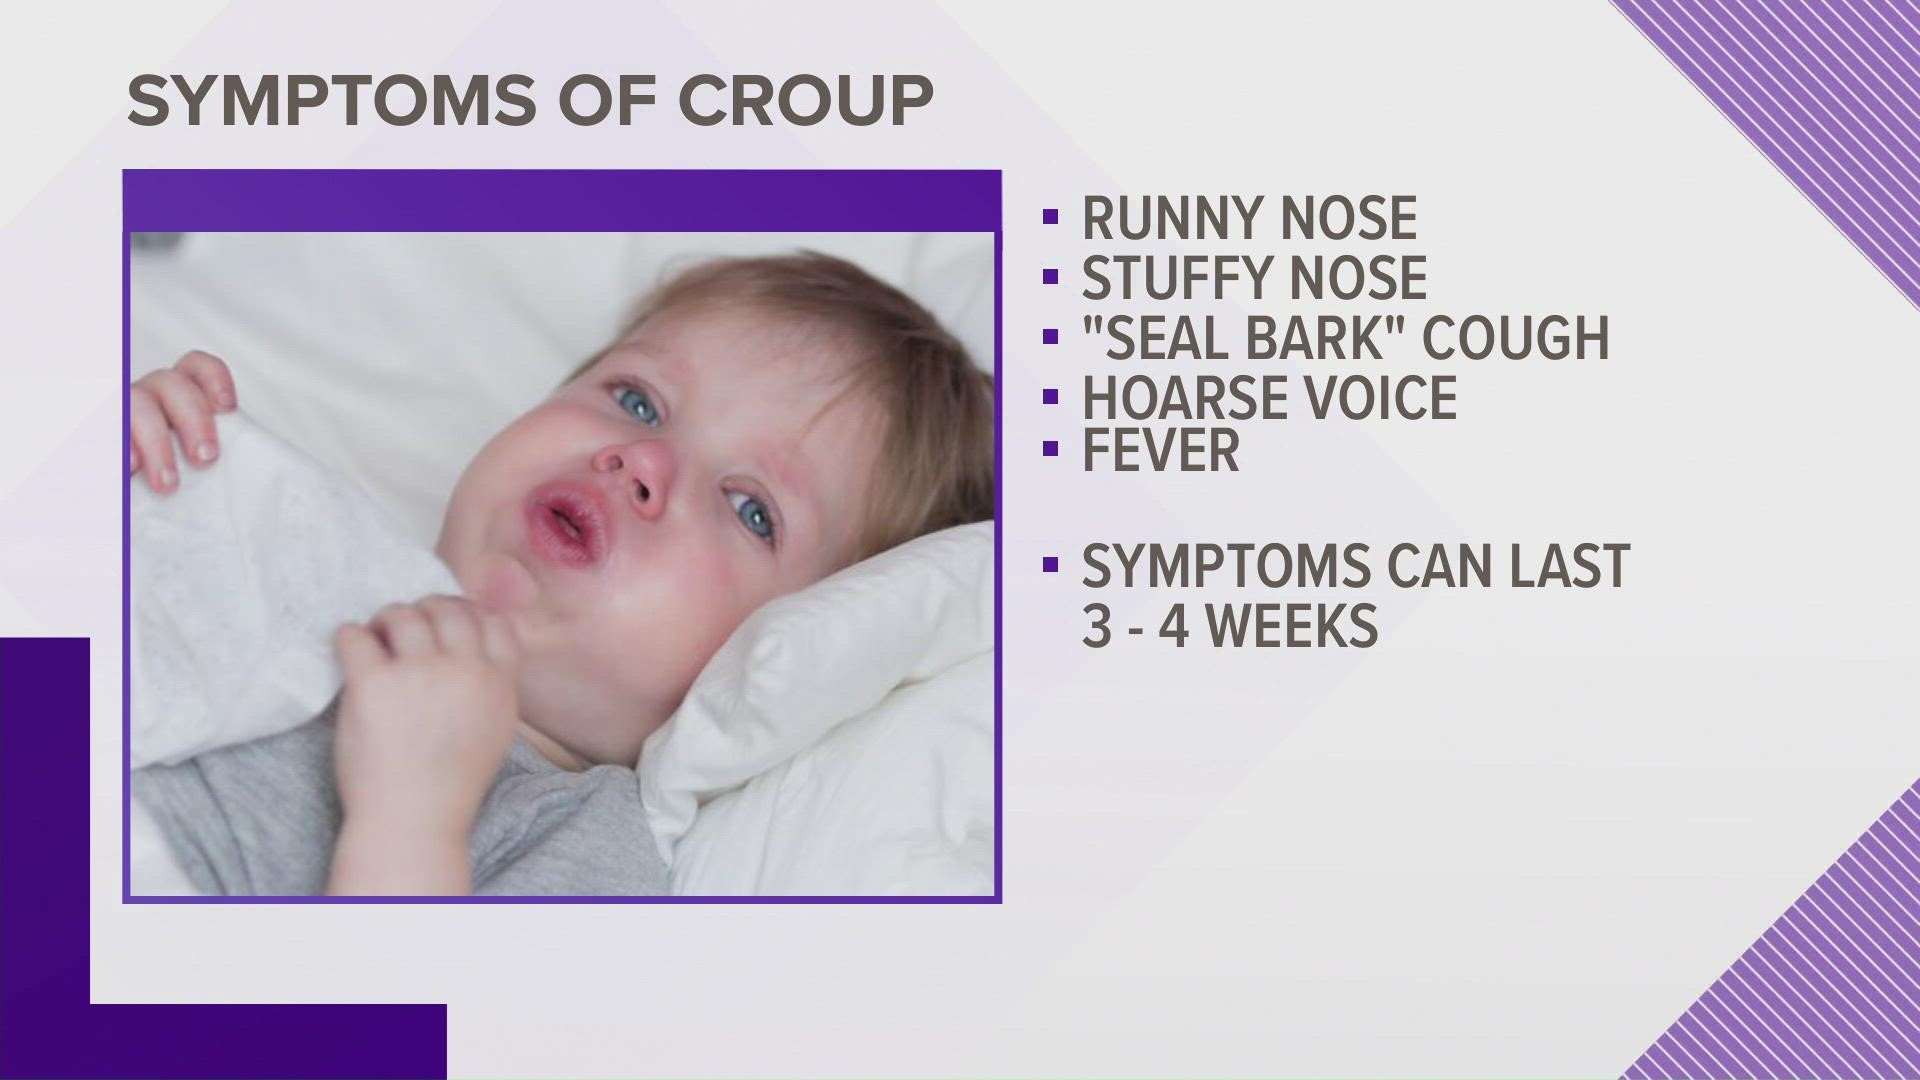 The omicron variant is causing a familiar illness in kids: croup. The common condition causes young children to sound like a seal when they cough.